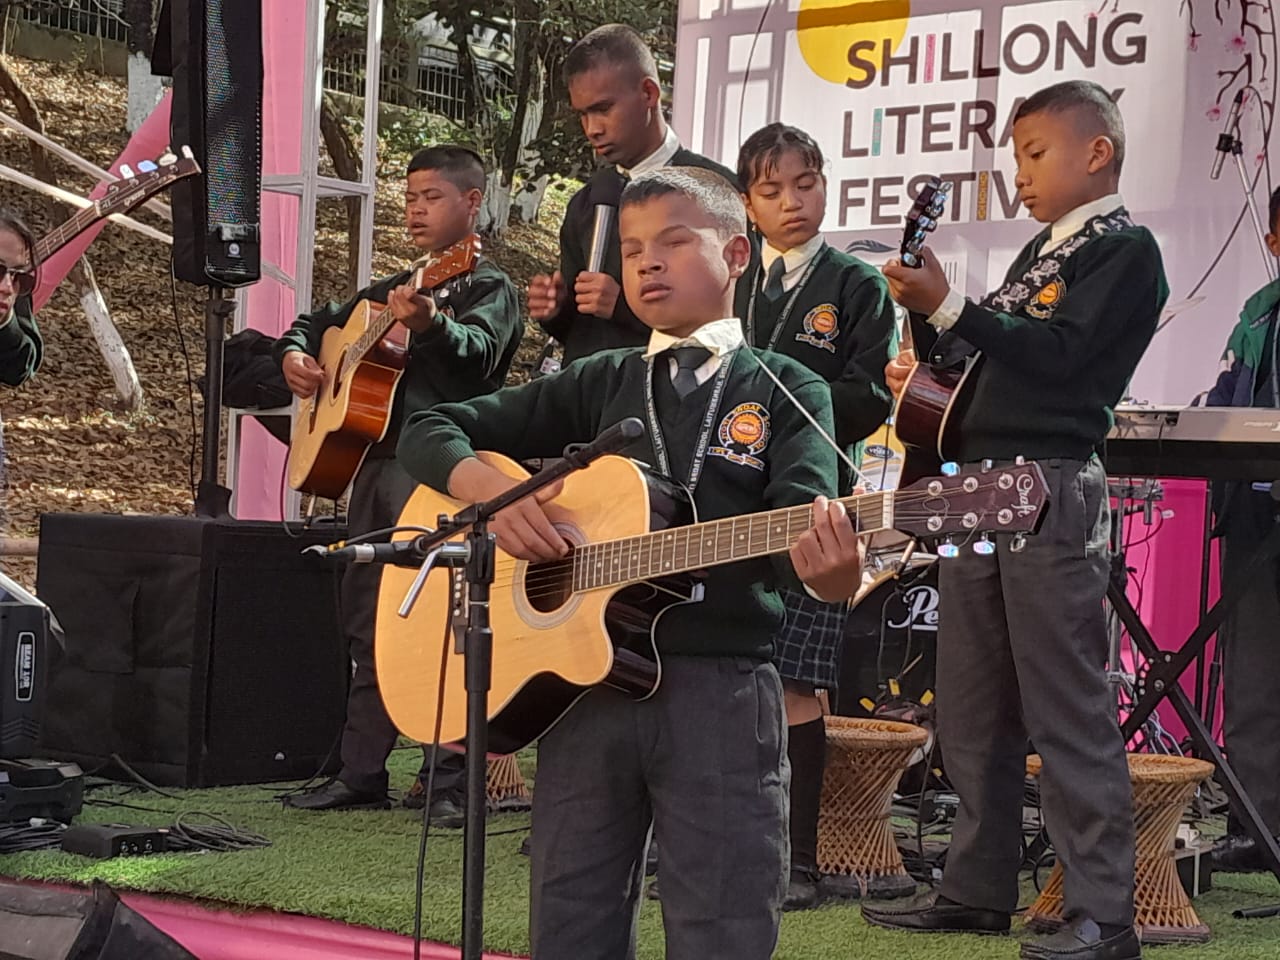 A unique immersive amalgamation of storytelling and music, the 2023 edition of Shillong Literary Festival, got underway on Tuesday at the Ward’s Lake in Shillong city.